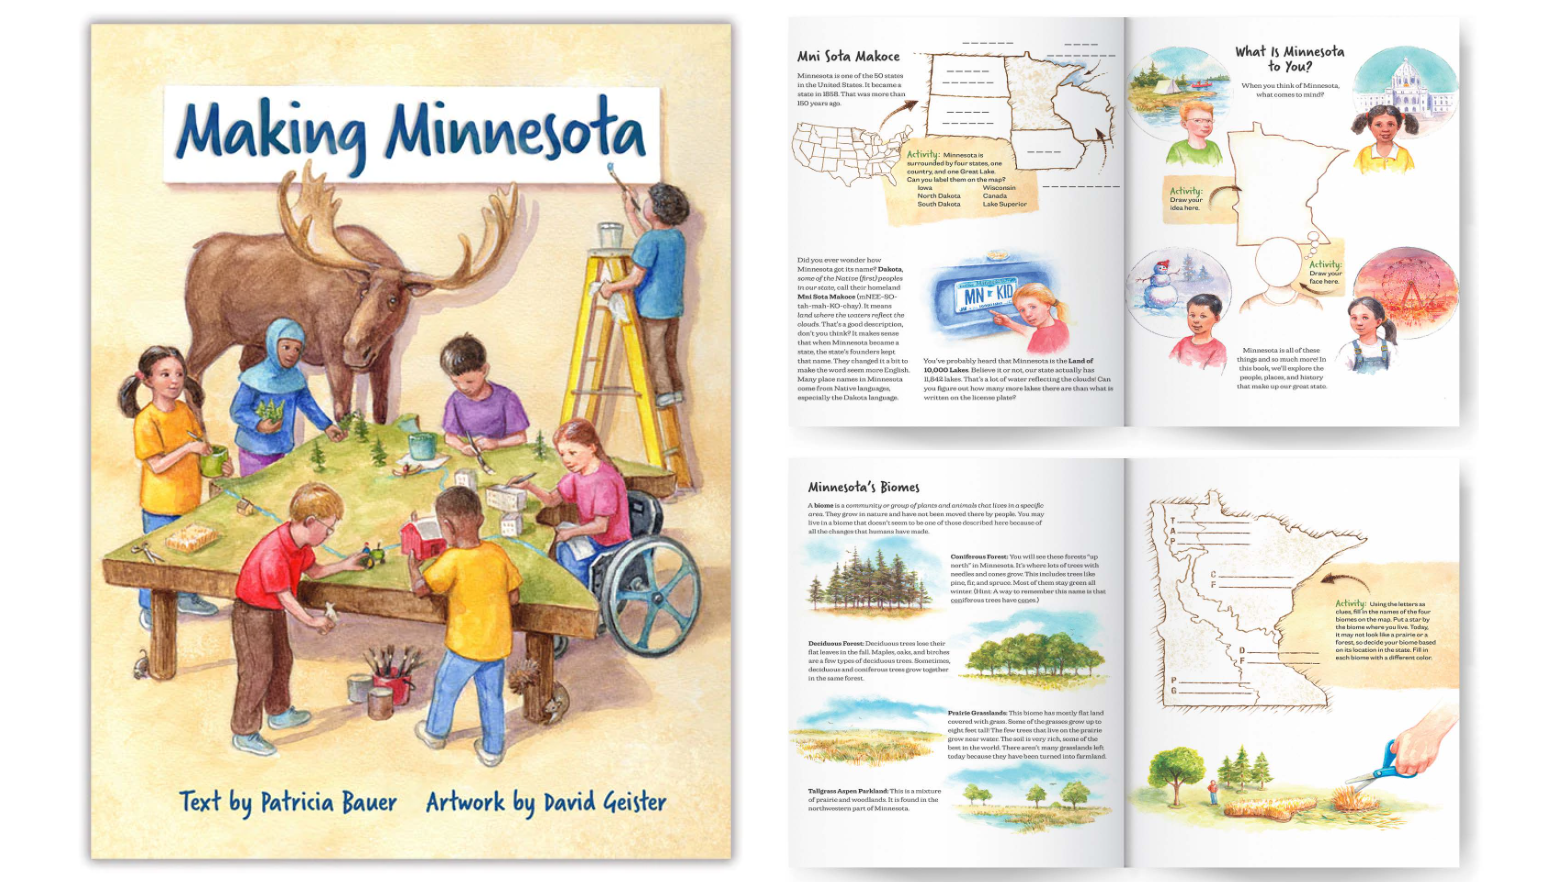 The cover and two interior spread from "Making Minnesota."